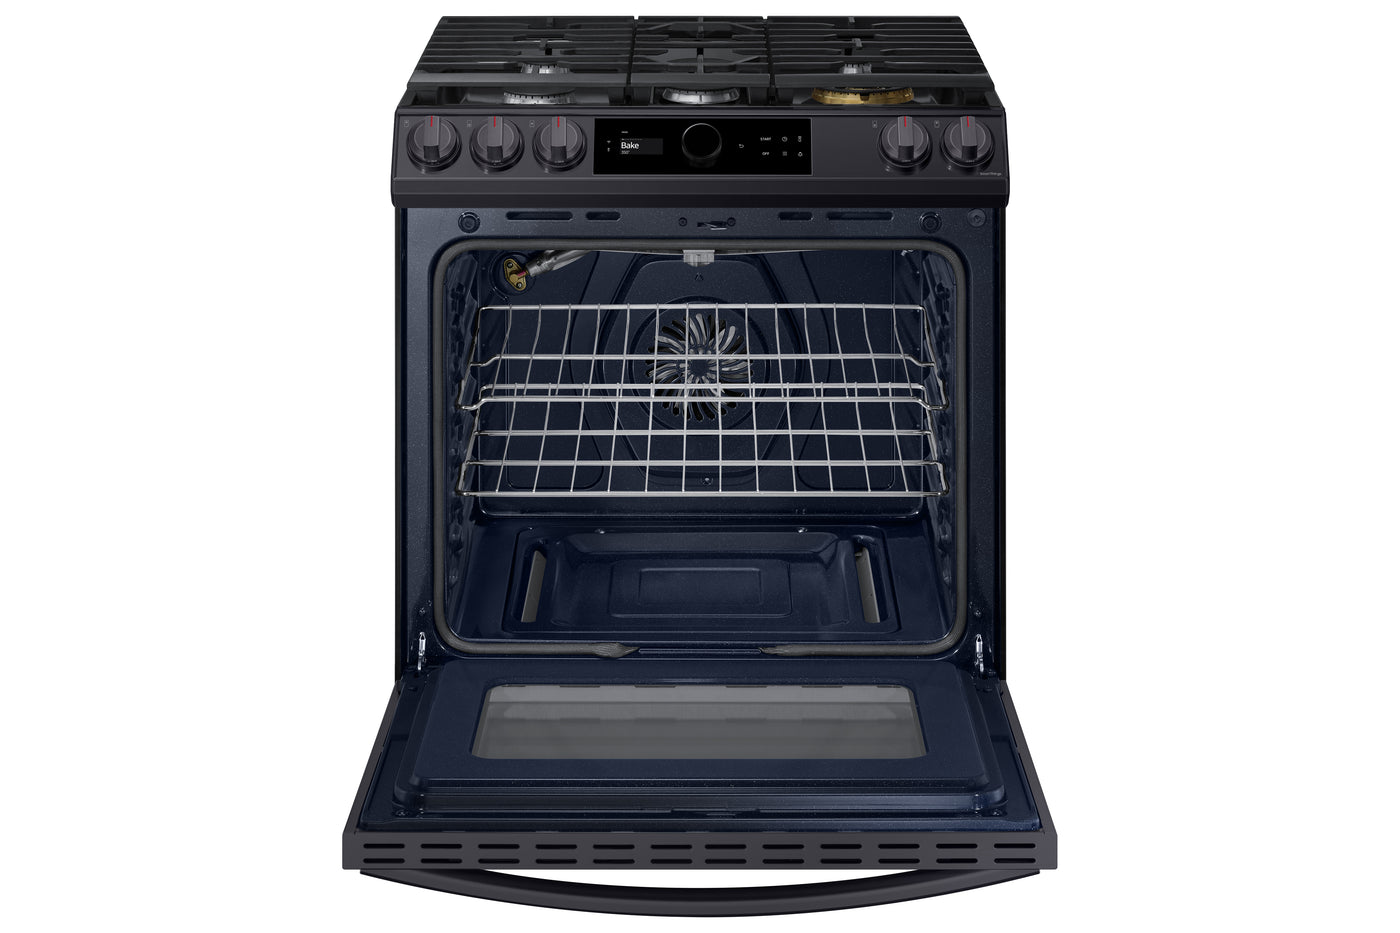 Samsung Black Stainless Steel Gas Range with 22K double burner and Air Fry (6.0 Cu.Ft) - NX60T8711SG/AA